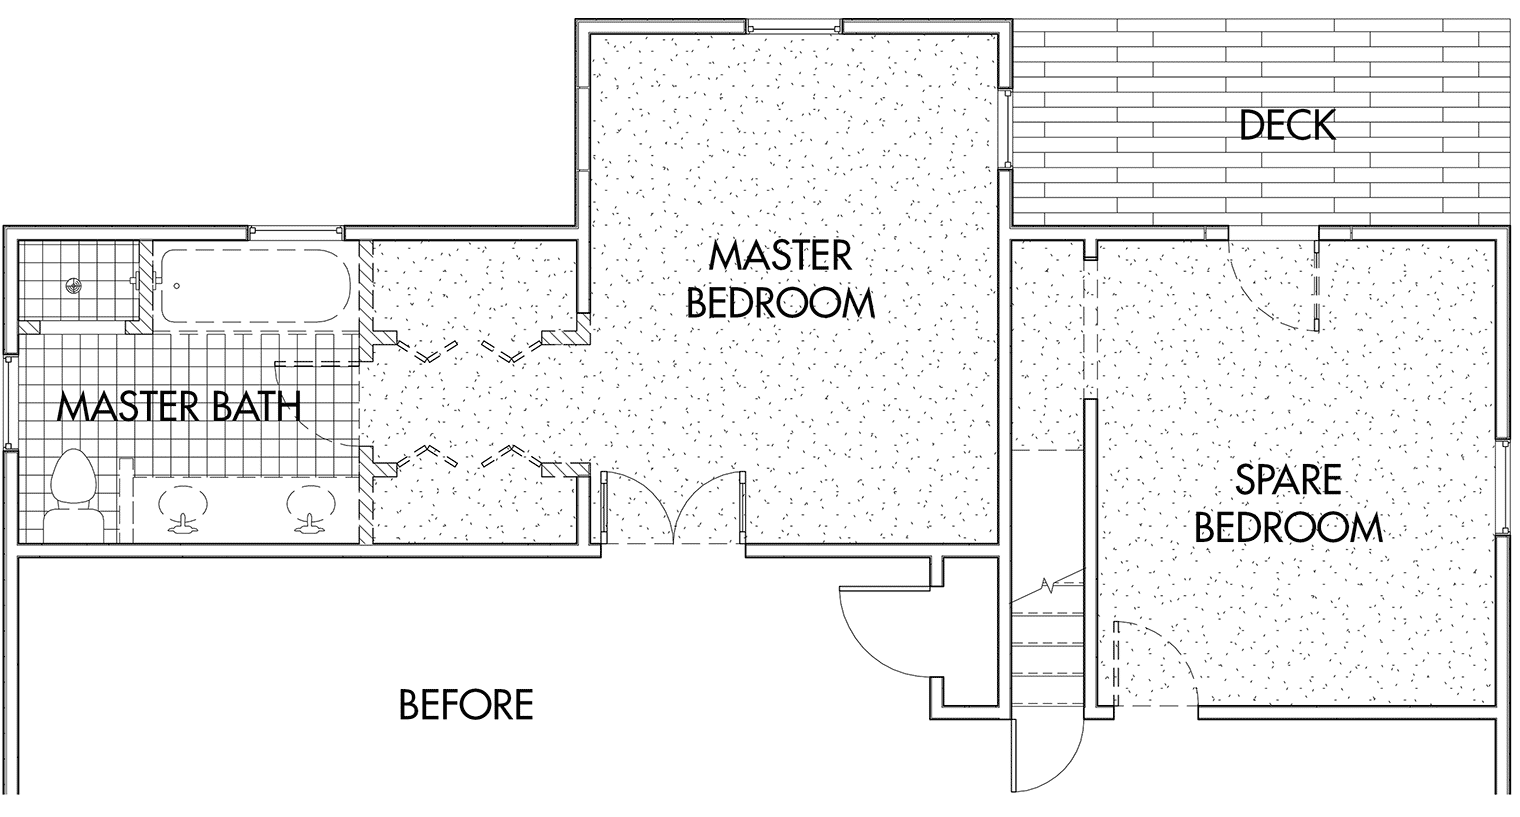 before floor plan of master bedroom and bathroom with adjacent spare room that can be reworked into a new master suite